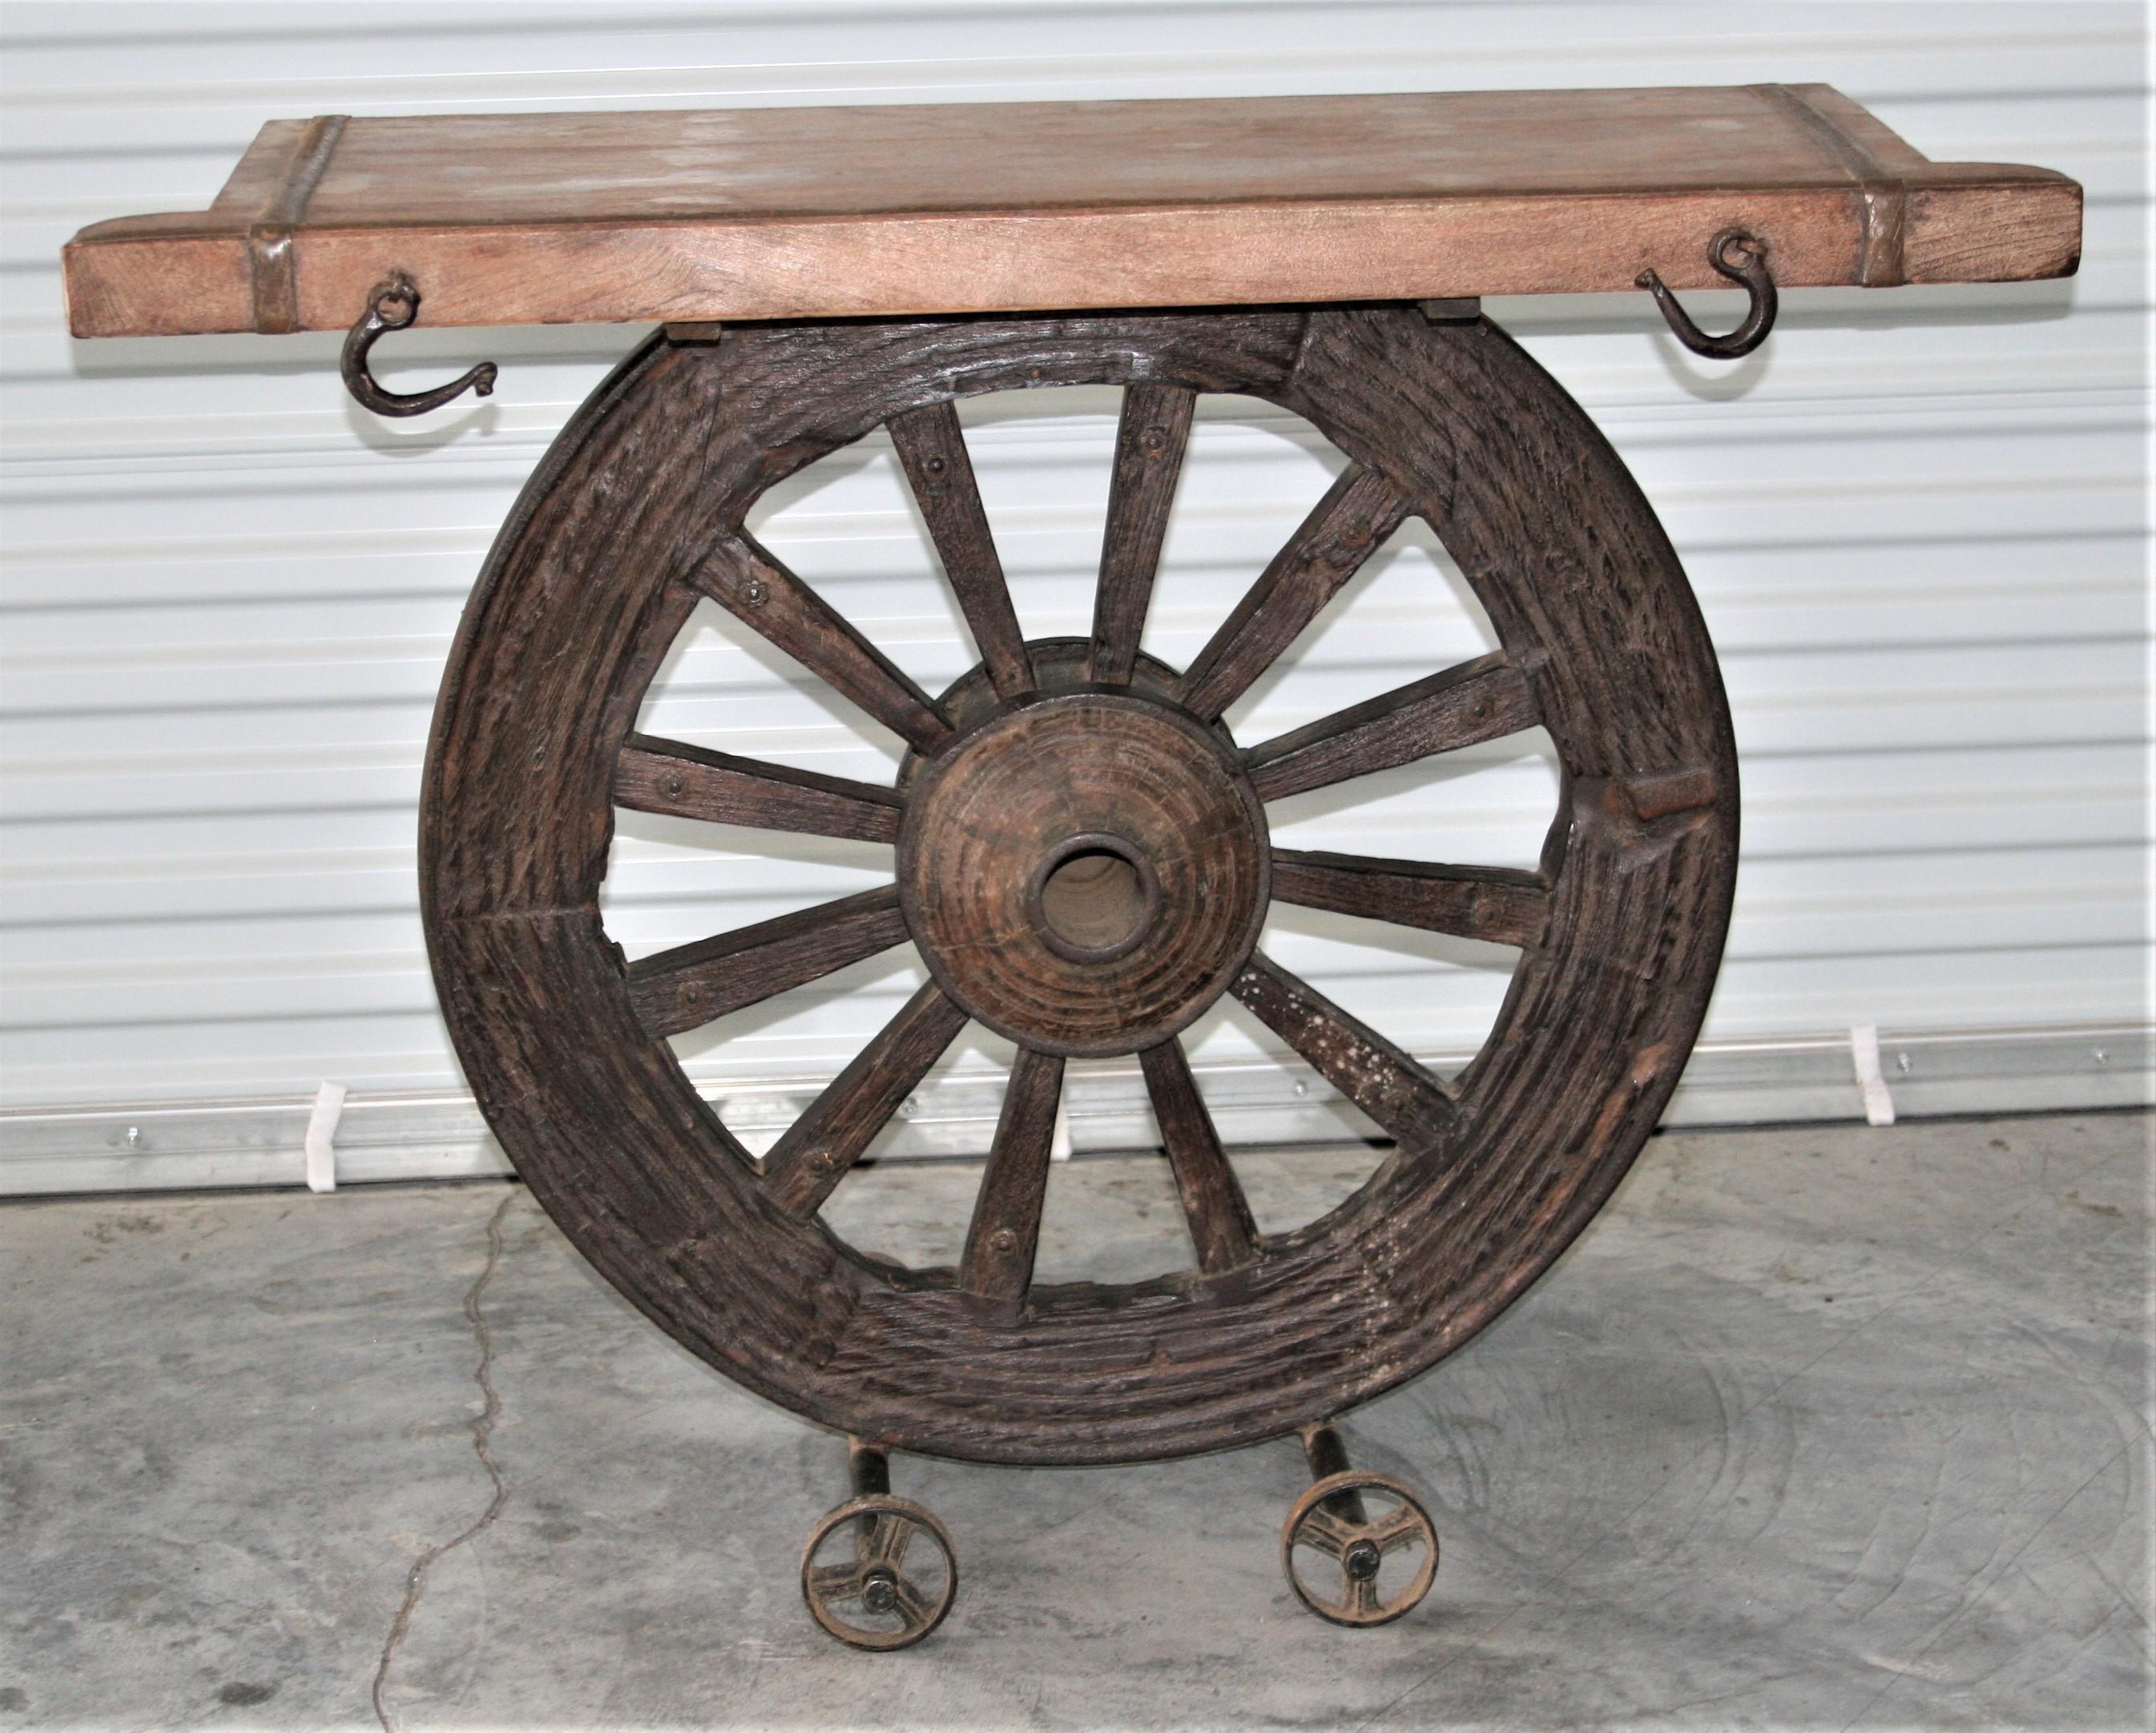 In late 19th century Calcutta was a busy port and was used by the British East India Company for handling their imports and exports. Heavily fortified carts drawn by stock bulls were used for hauling the goods in and out of ports. This console table